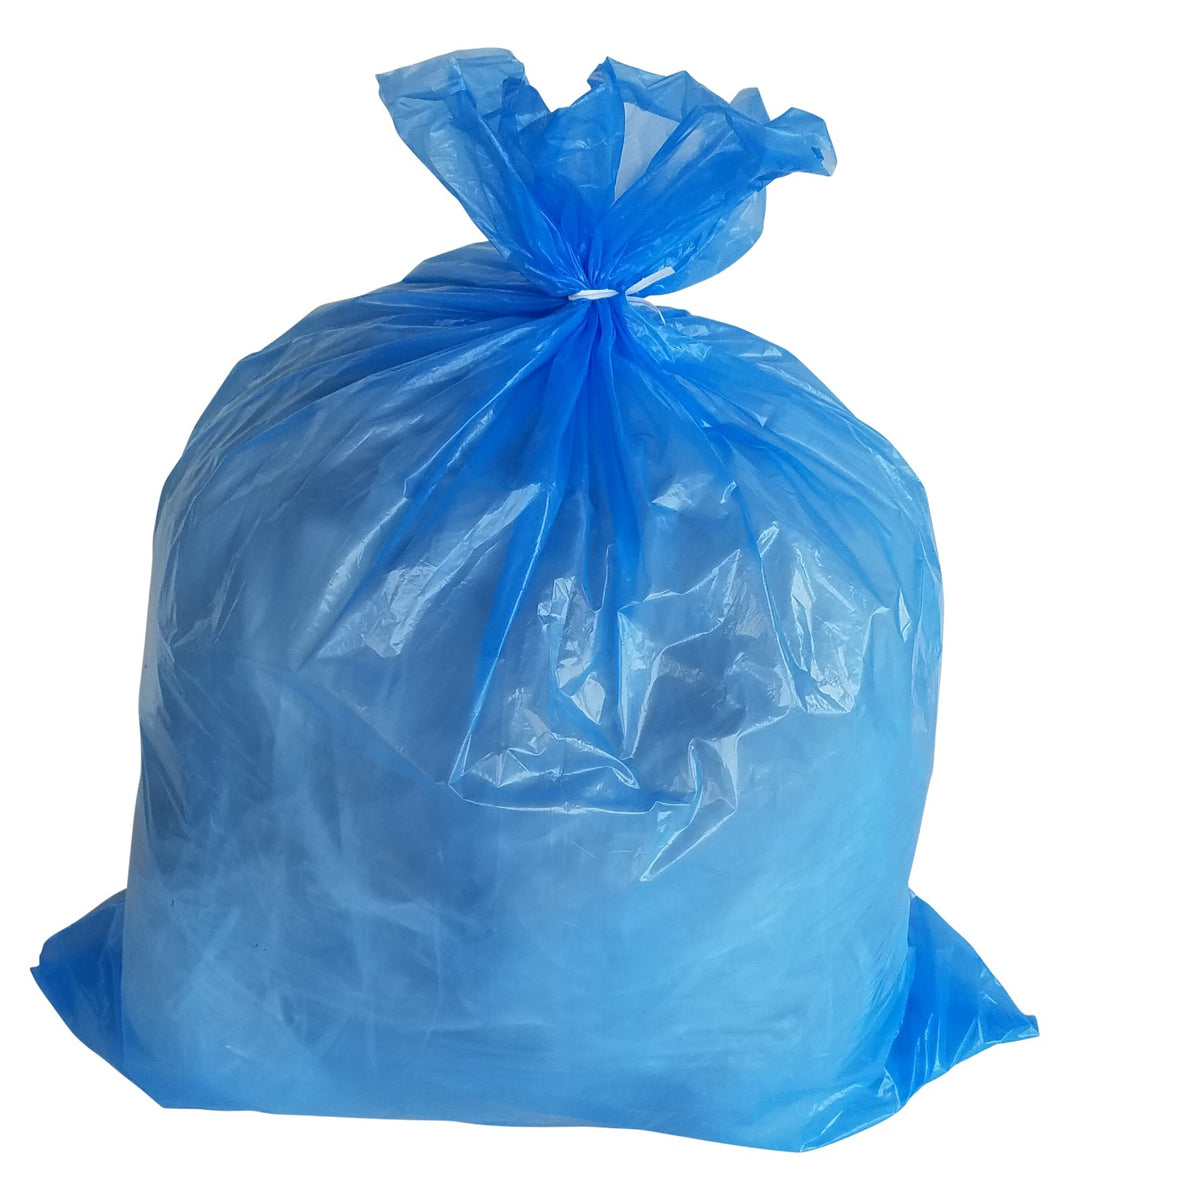 PlasticMill 50-60 Gallon Garbage Bags: Red, 1.2 Mil, 38x58, 100 Bags.